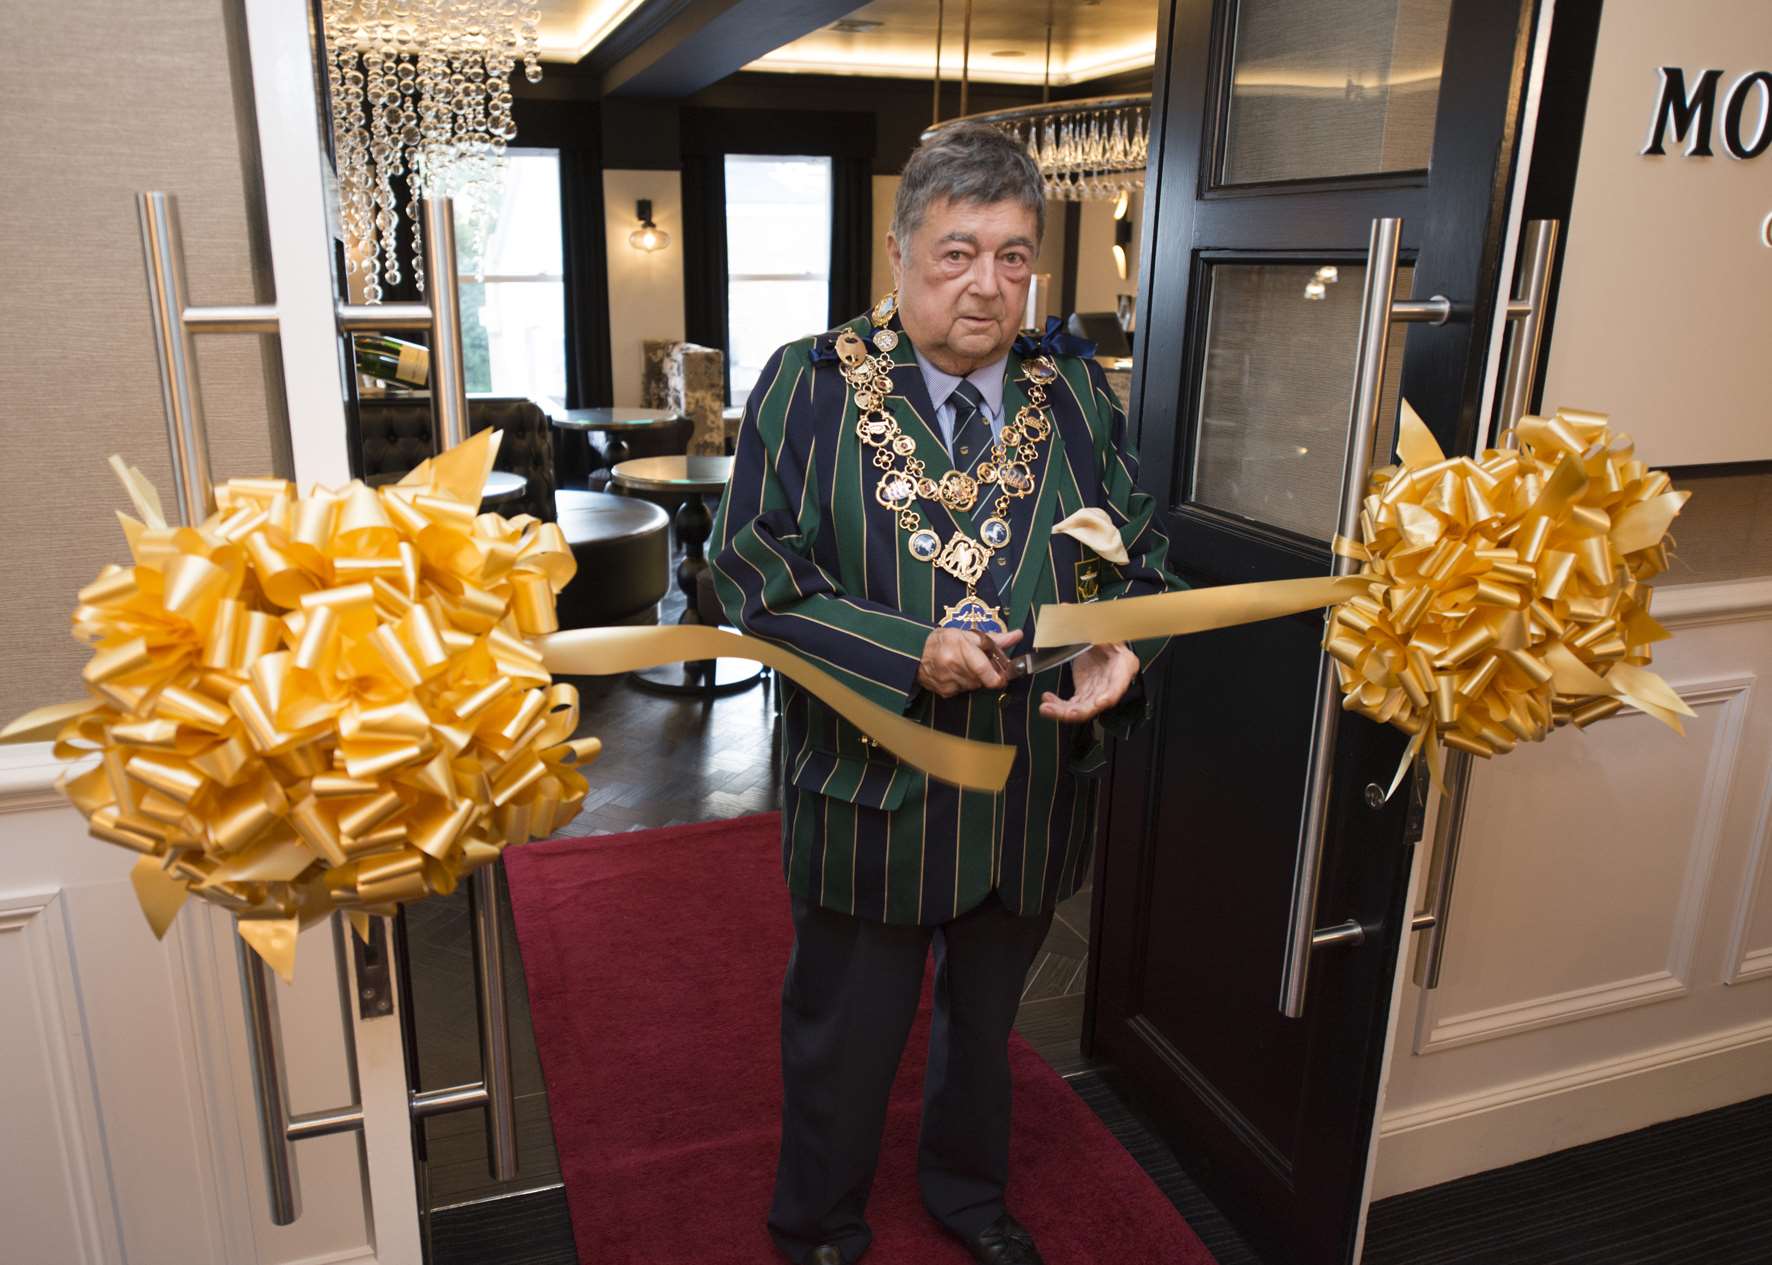 Cllr Michael Lyons, Hythe's town mayor opened the new bar